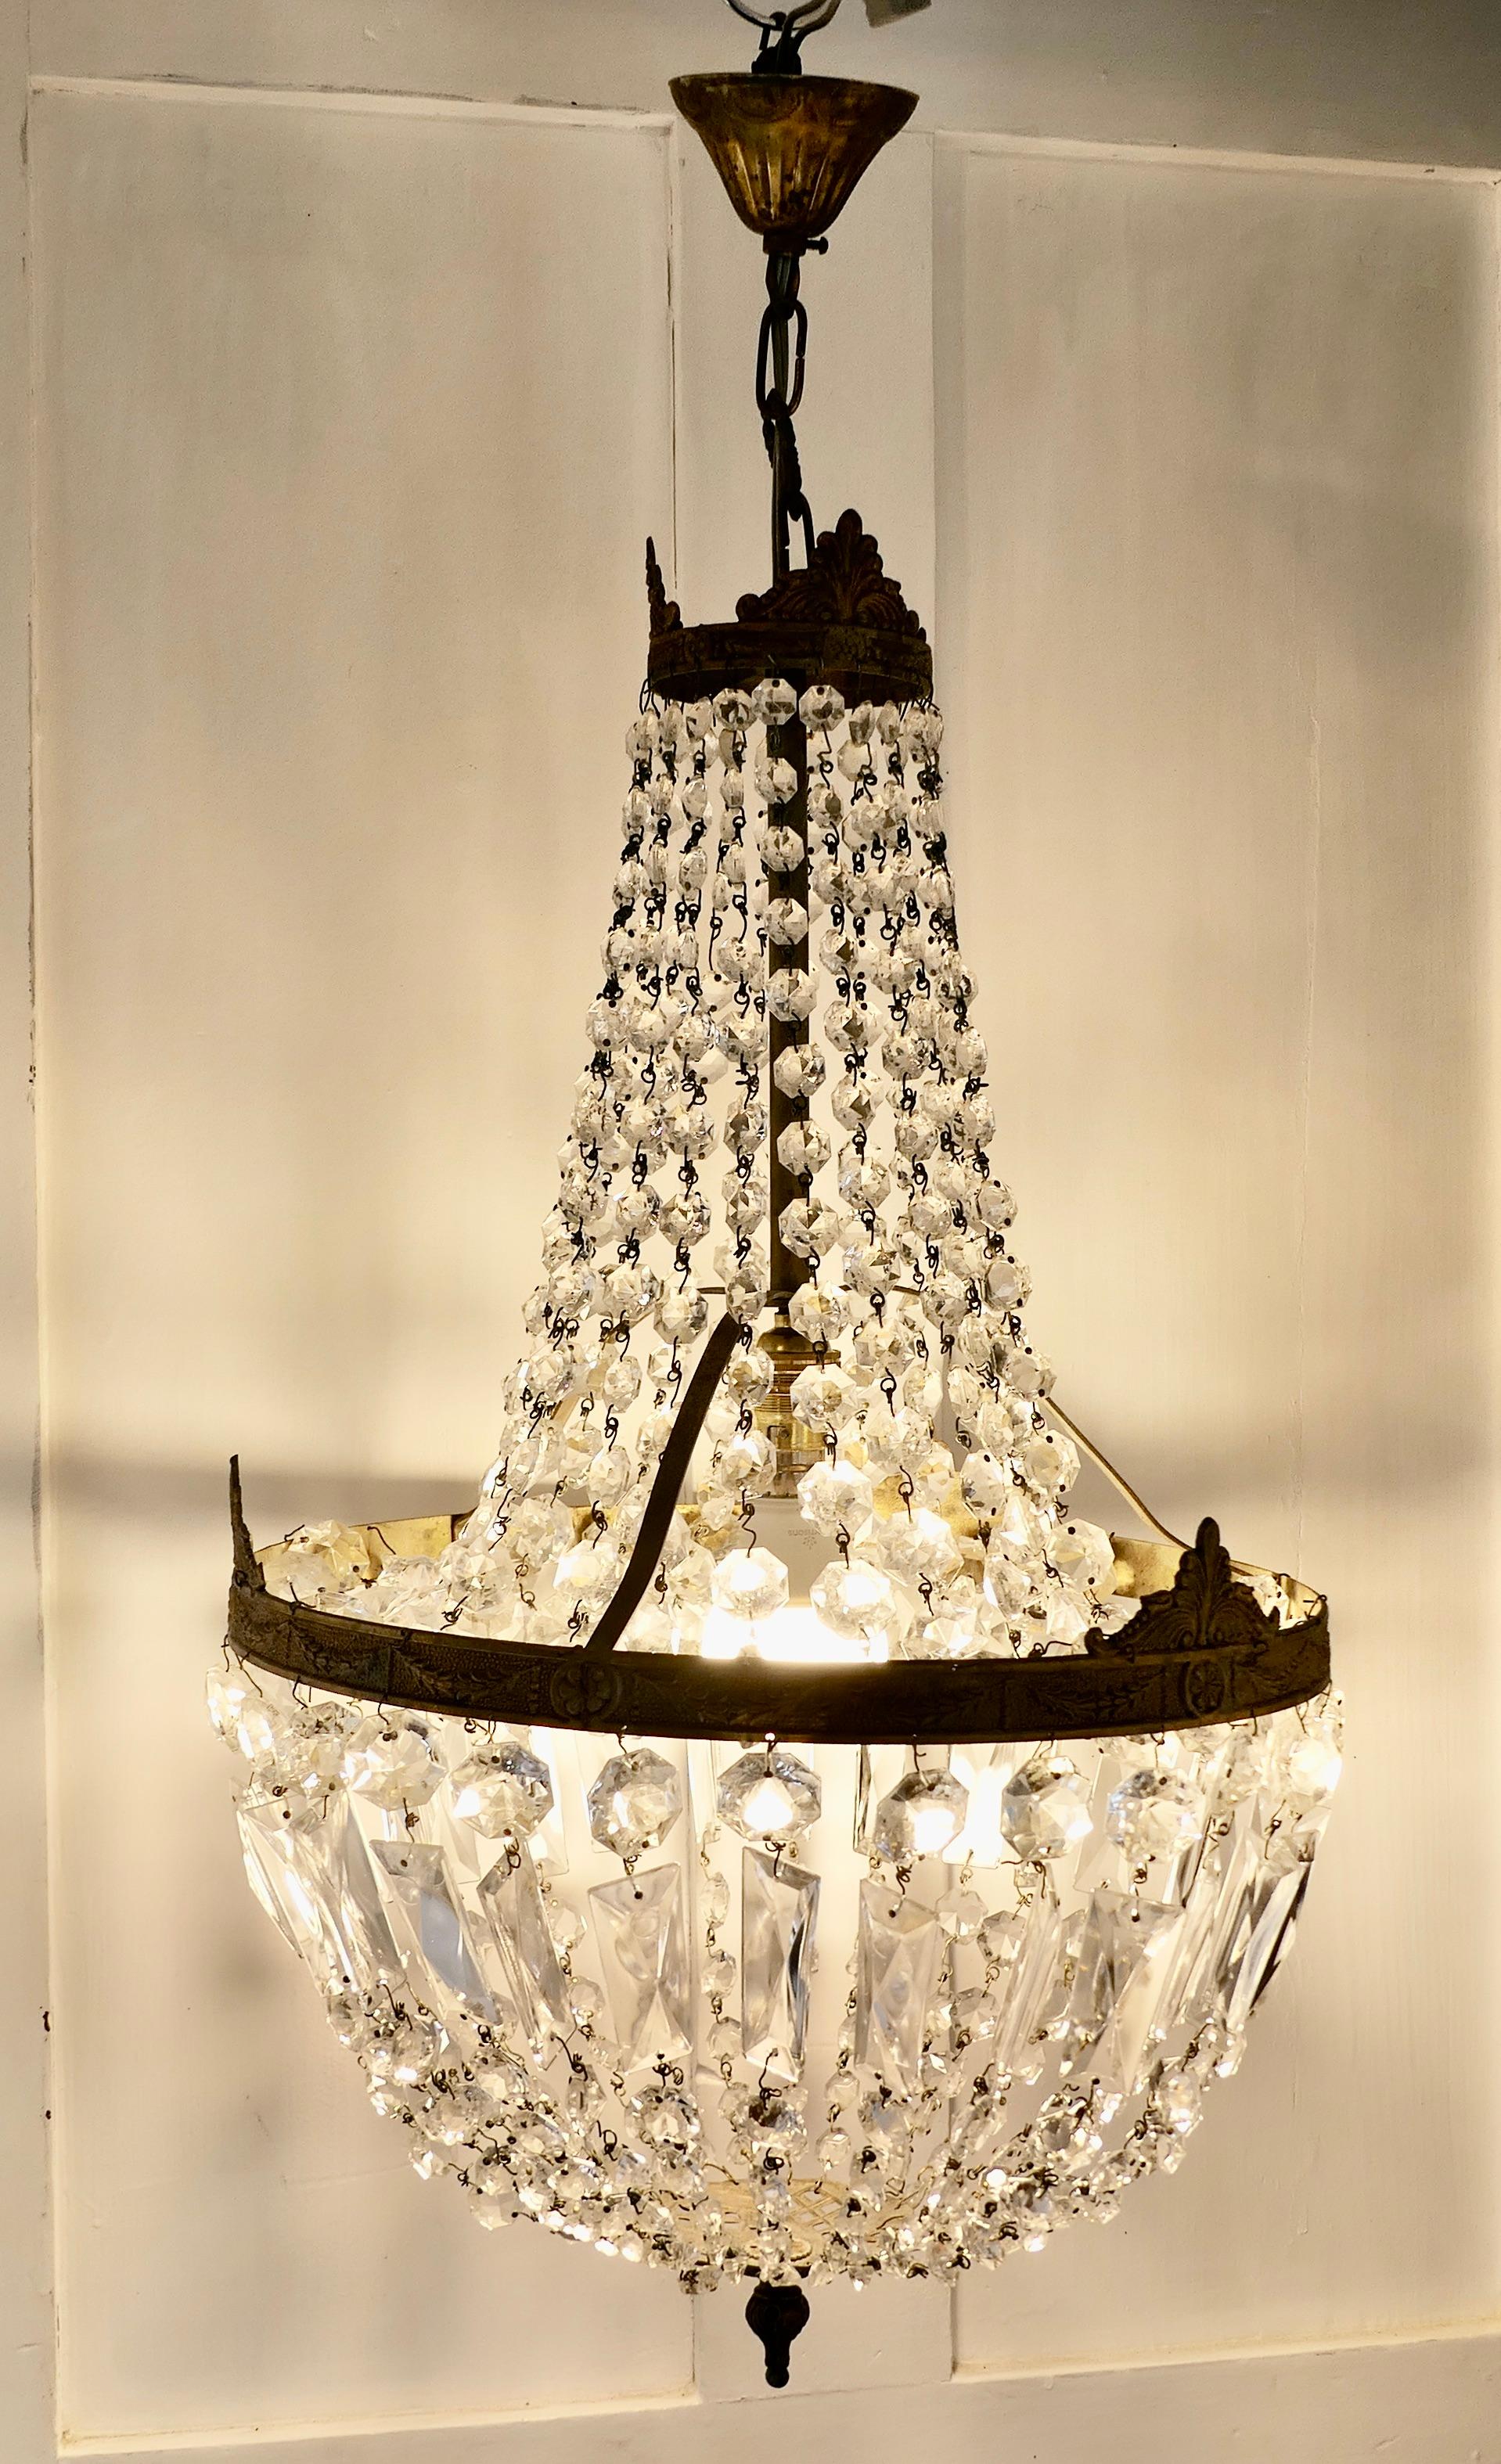 Large French Empire Style Tent chandelier

This is a lovely piece, quite a large chandelier, it has an aged brass frame hung with large crystals, completed at the bottom with a basket of multi faceted crystal drops

The lamp is in good working